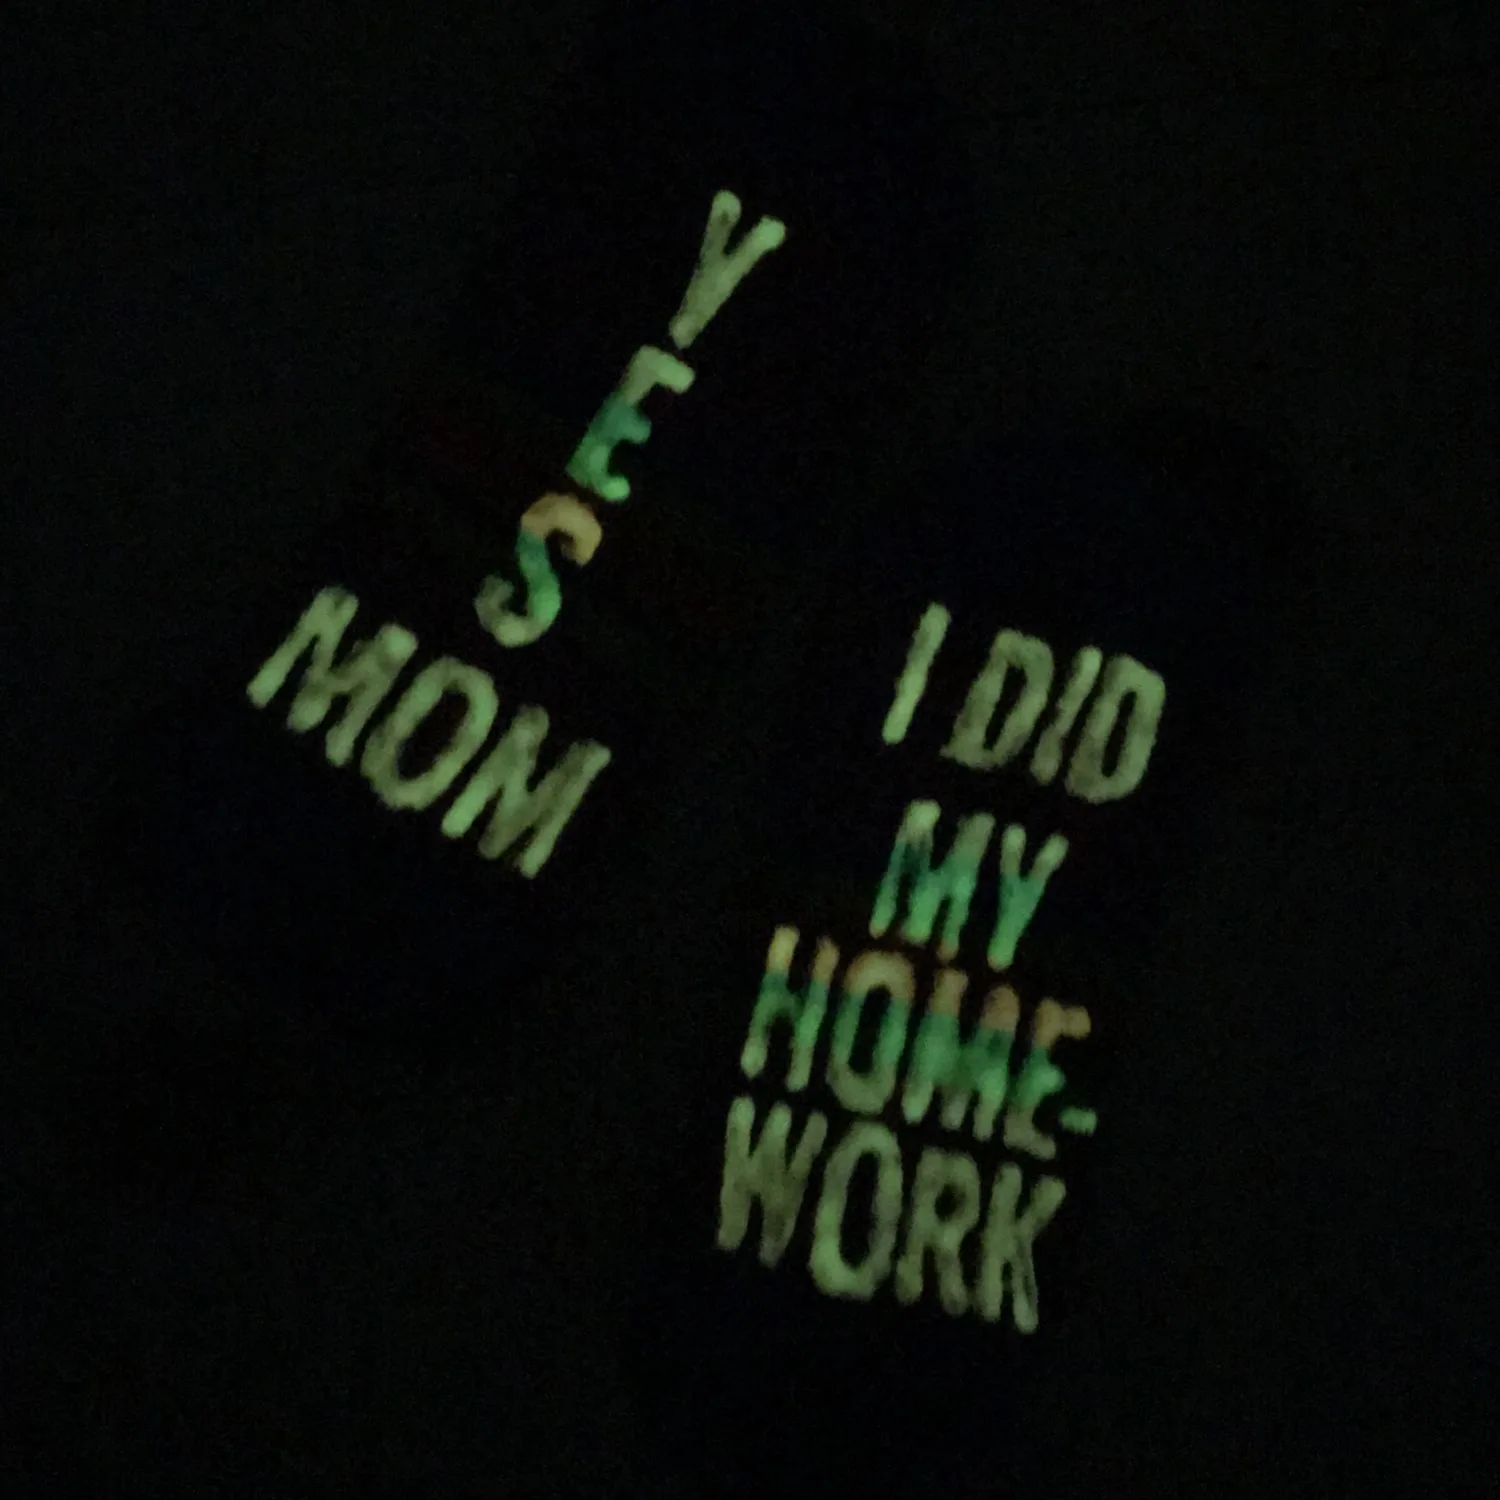 glow in the dark socks made with the freezer paper stencil method.